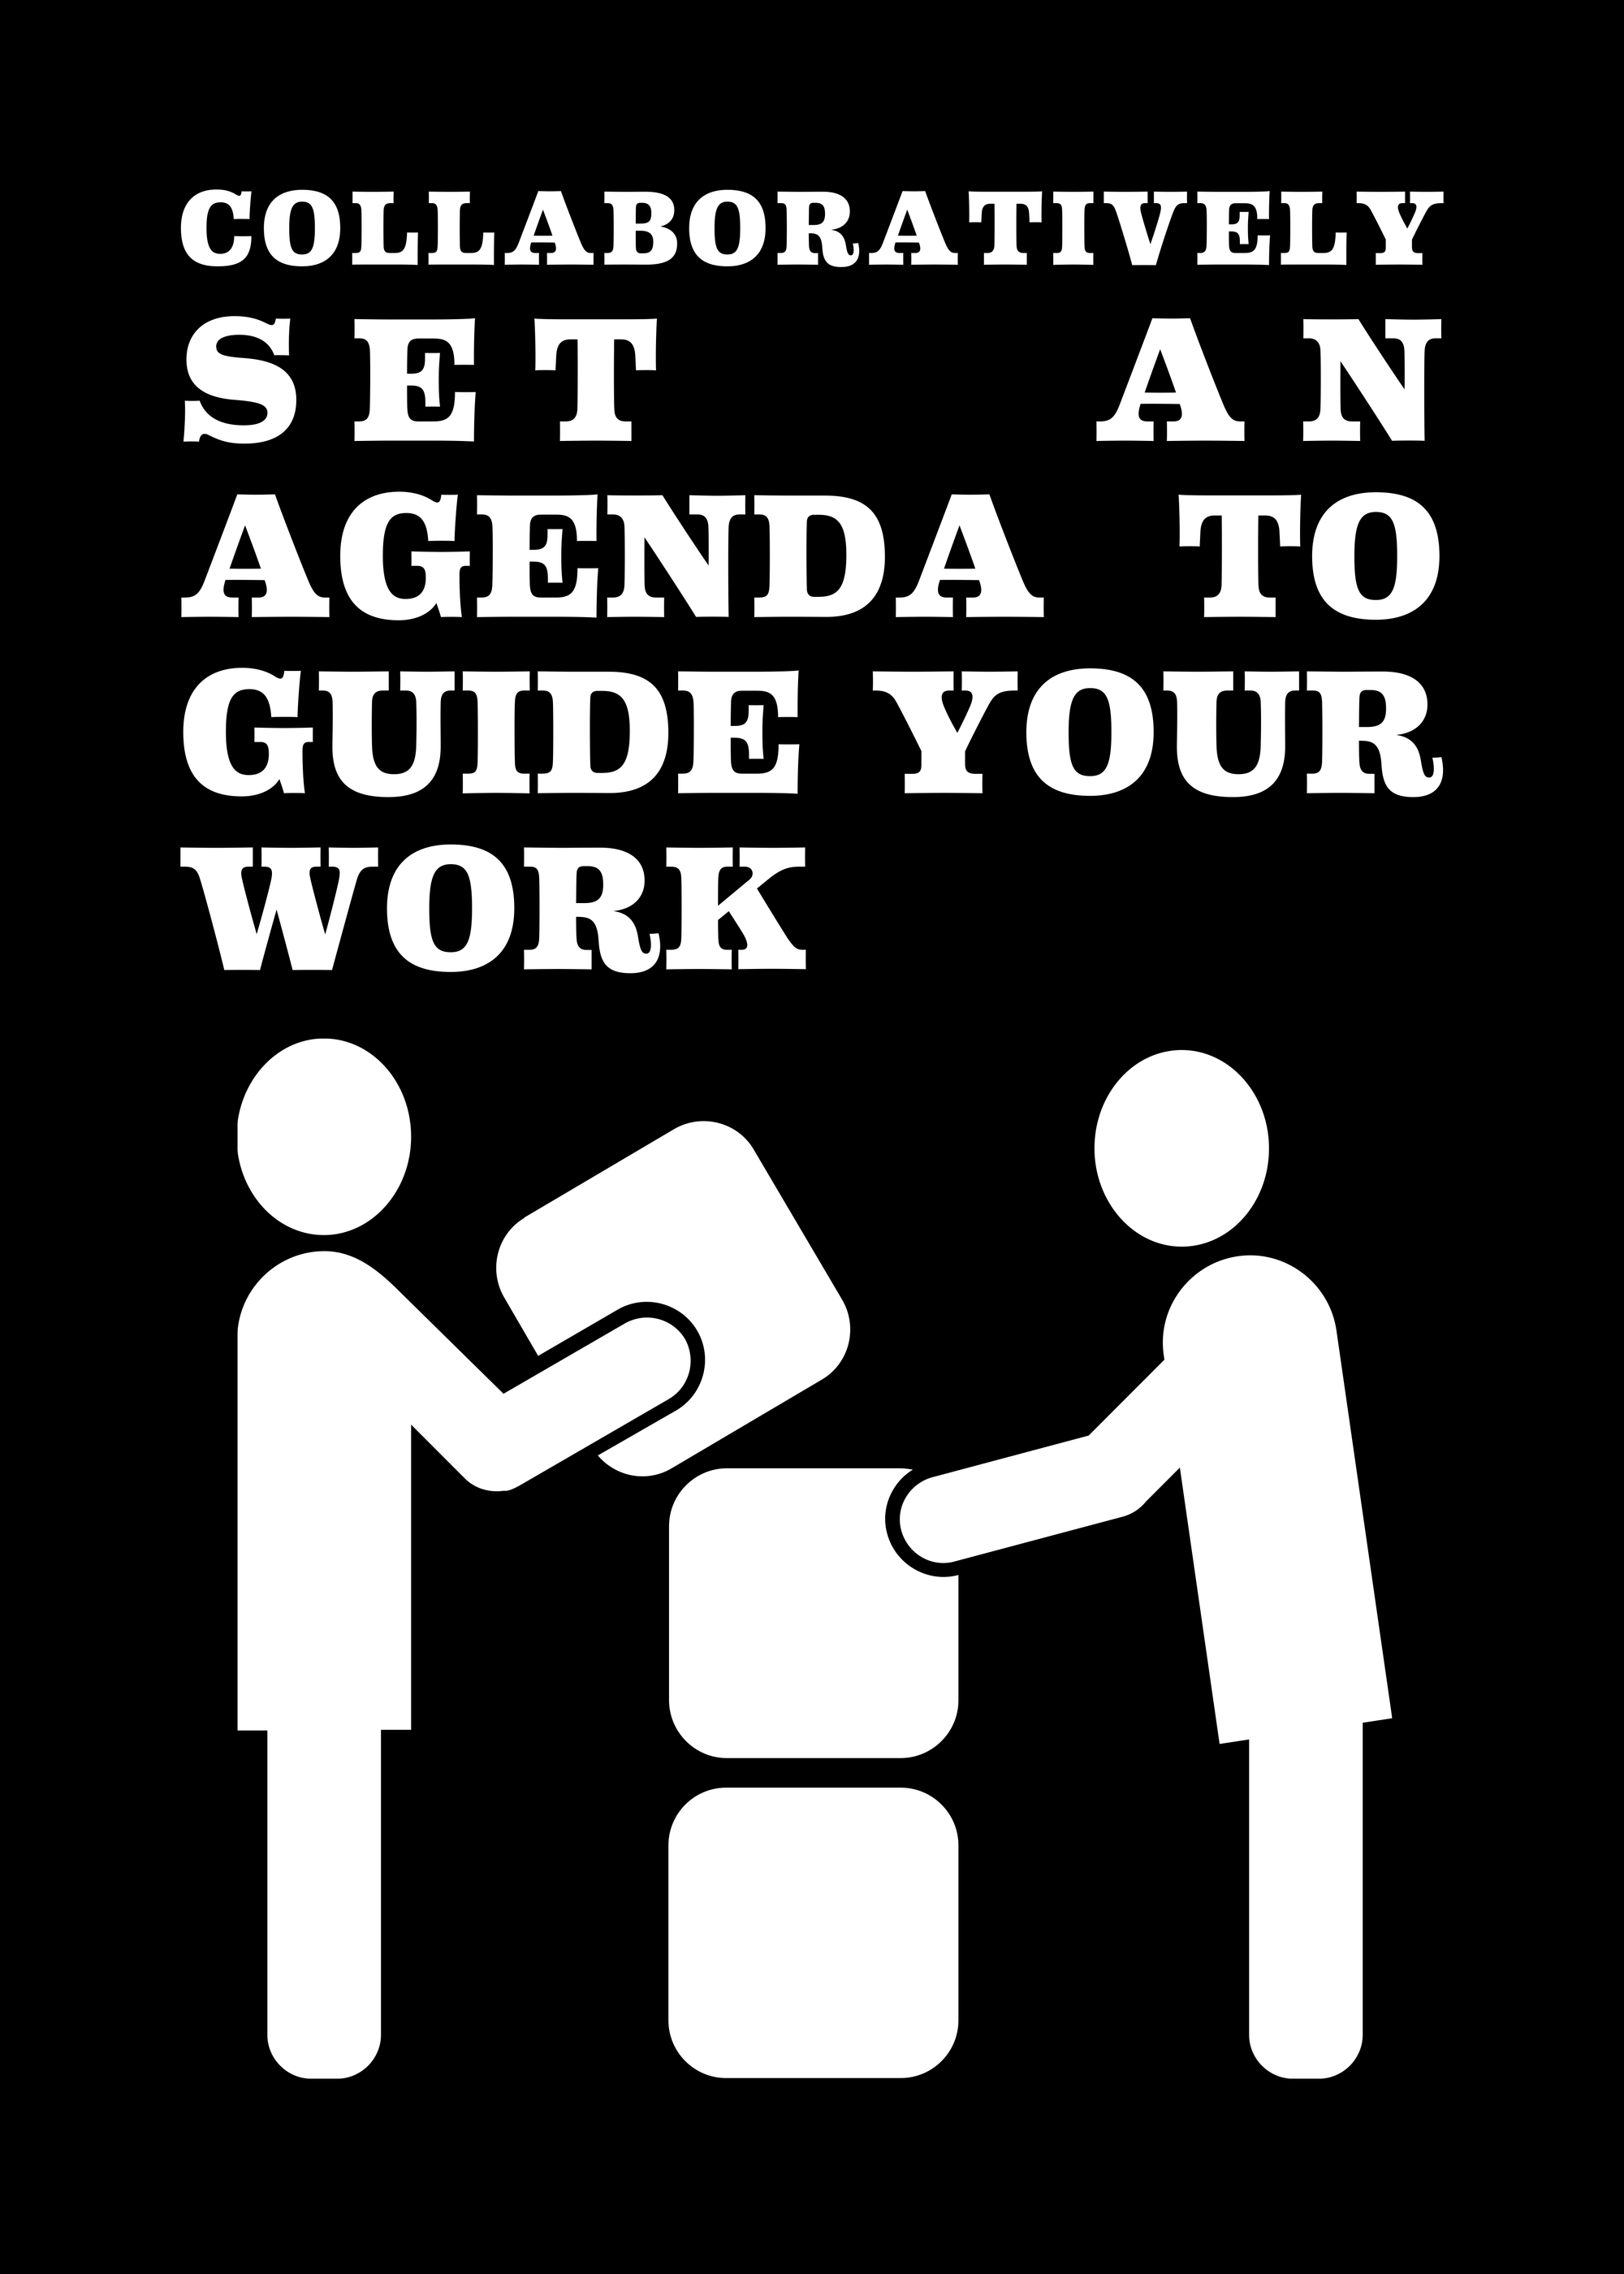 Collaboratively set and agenda to guide your work.